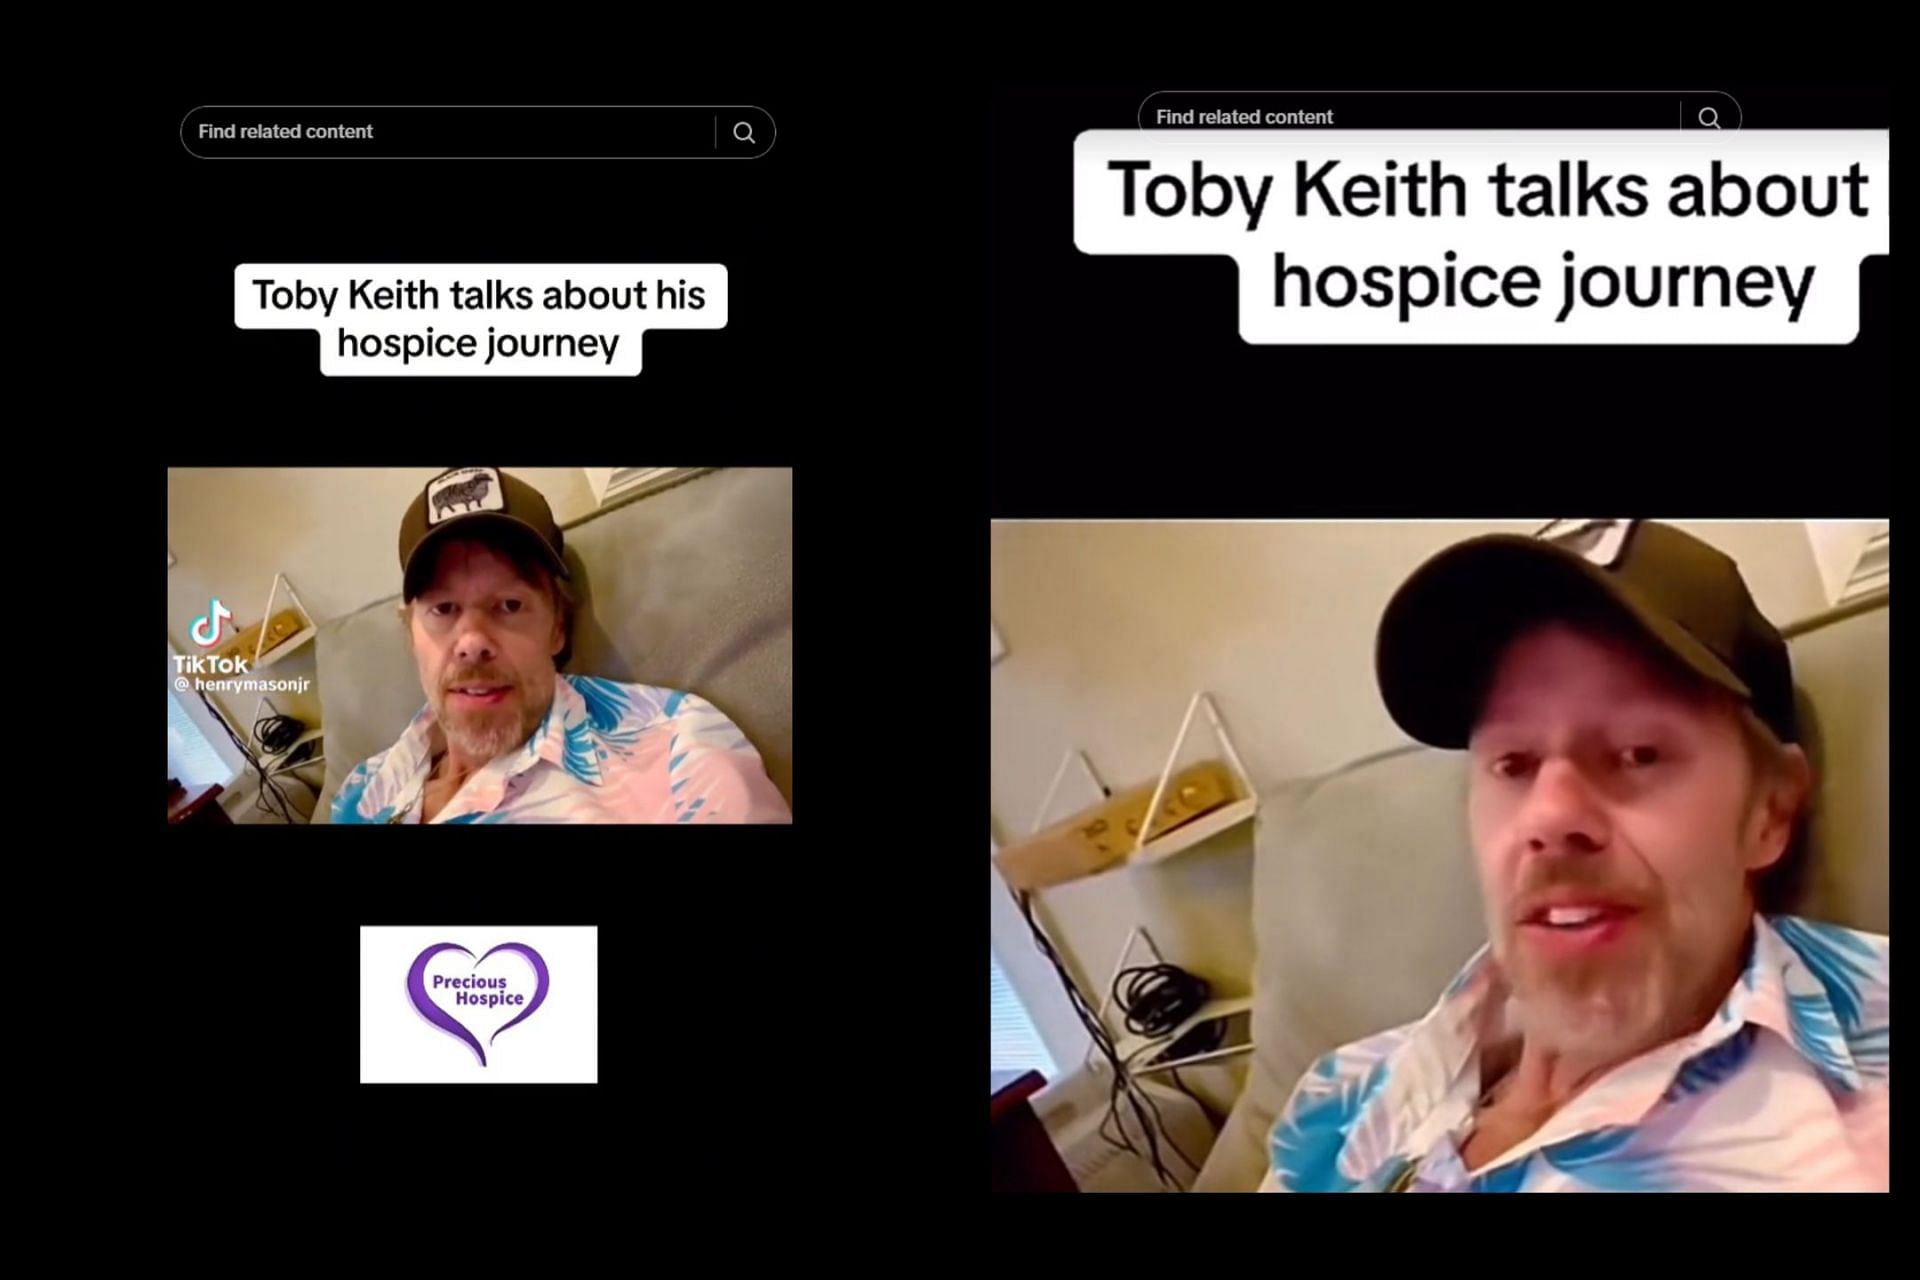 Claims of the musician sharing a &quot;hospice&quot; video go viral (Image via henrymasonjr/TikTok)